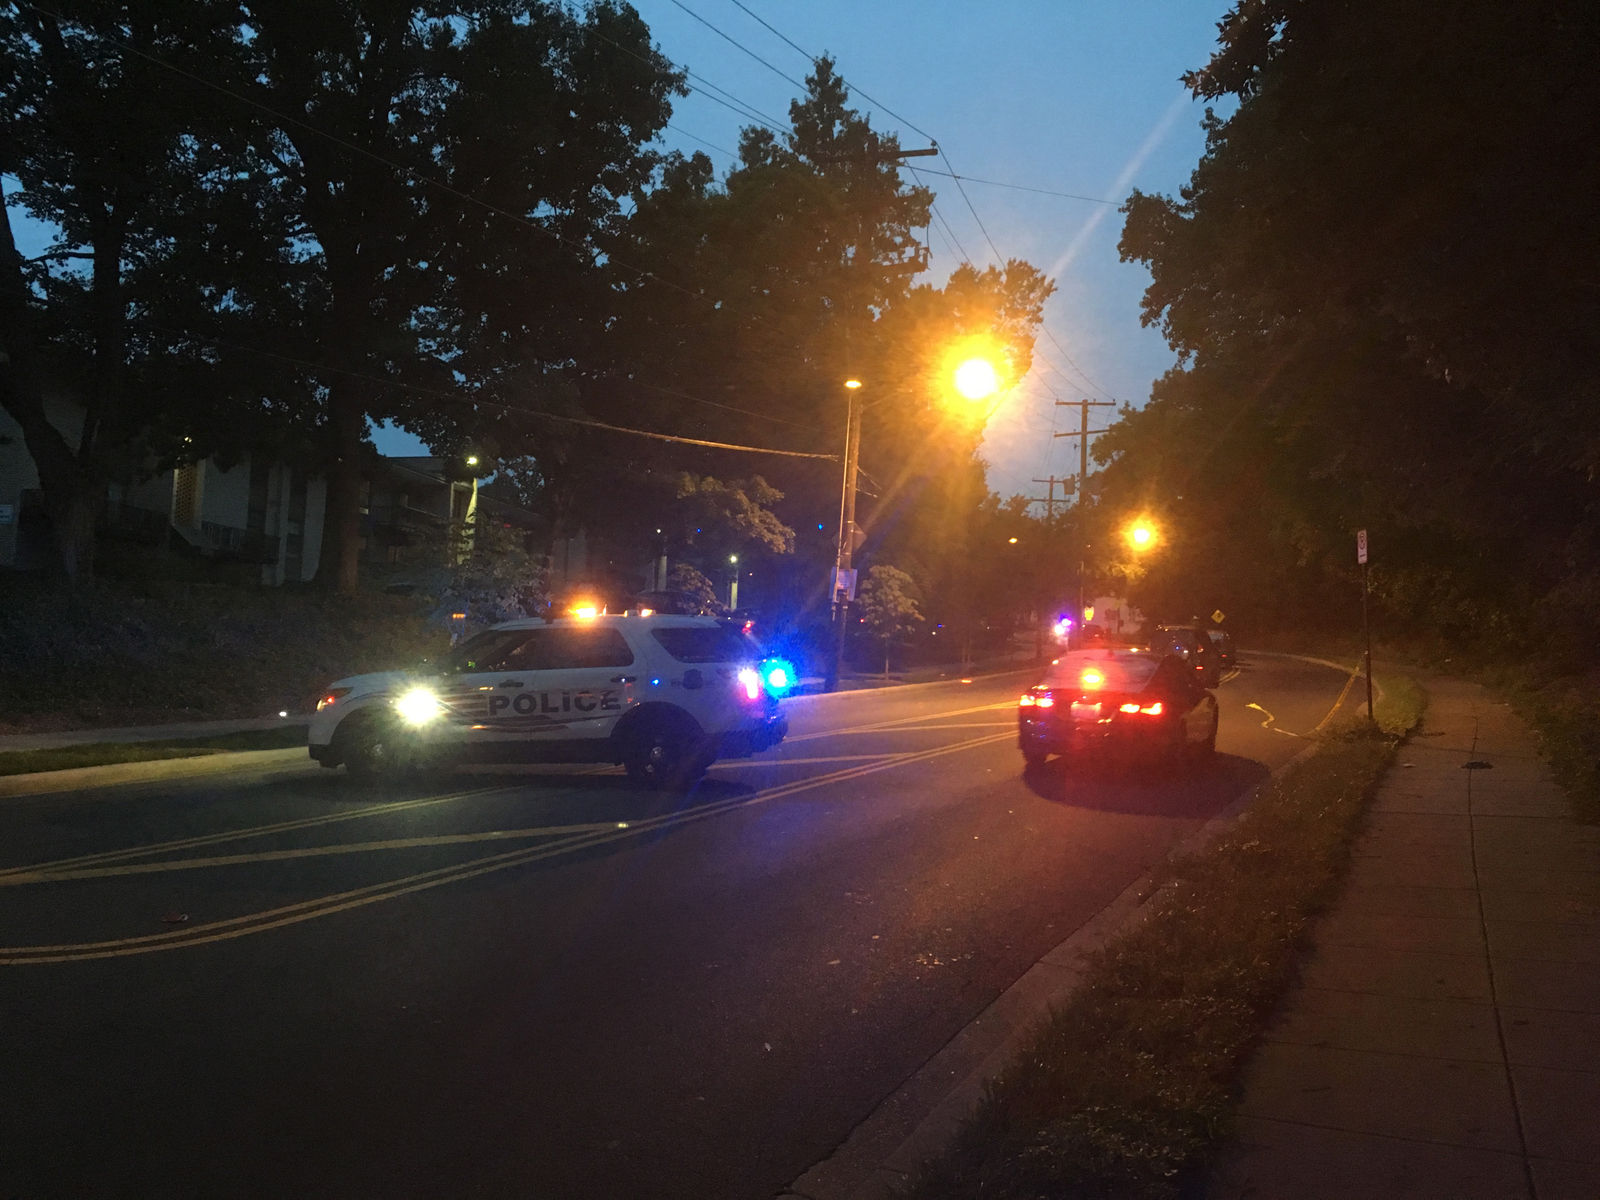 Police say the suspect attempted to flee from an arrest and then pulled a gun on an officer. The officer then shot the suspect, who is believed to have suffered non-life threatening wounds. (WTOP/Mike Murillo)